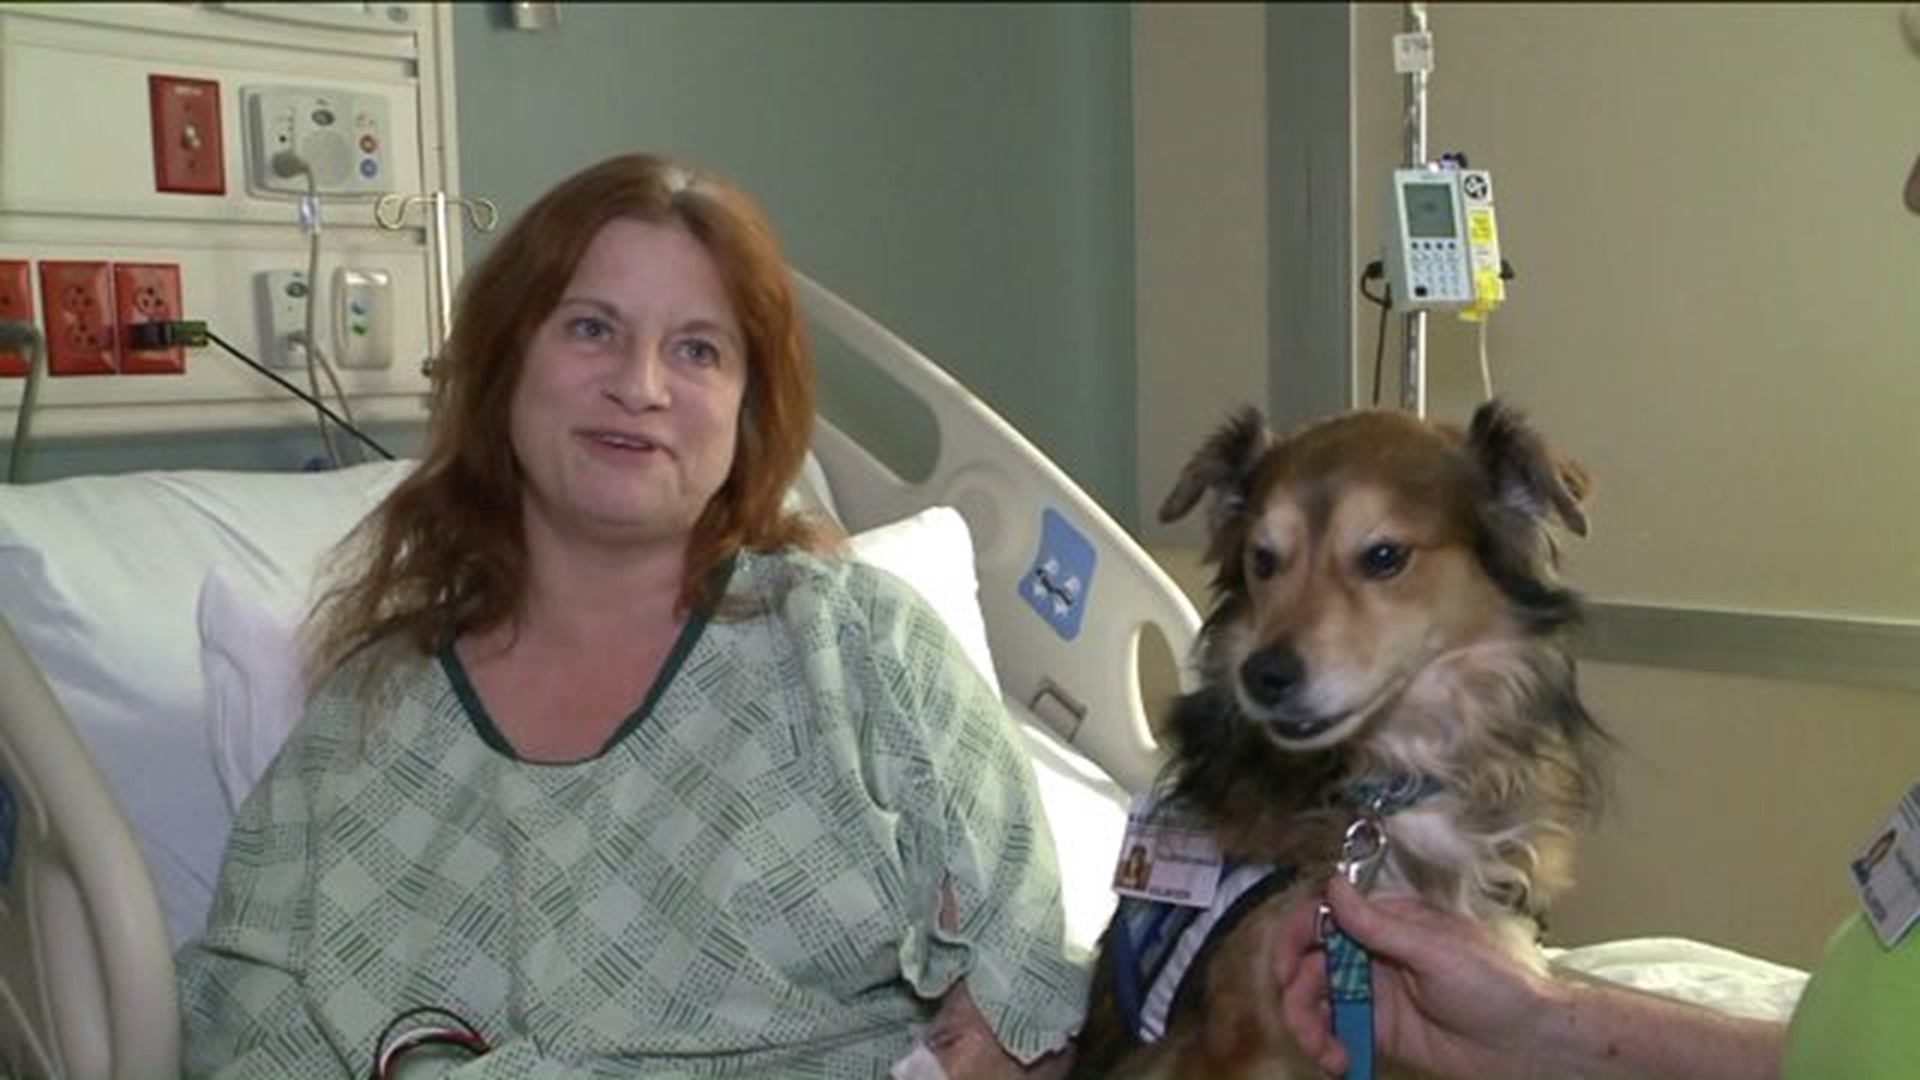 Pup gives love and hope to hospital patients